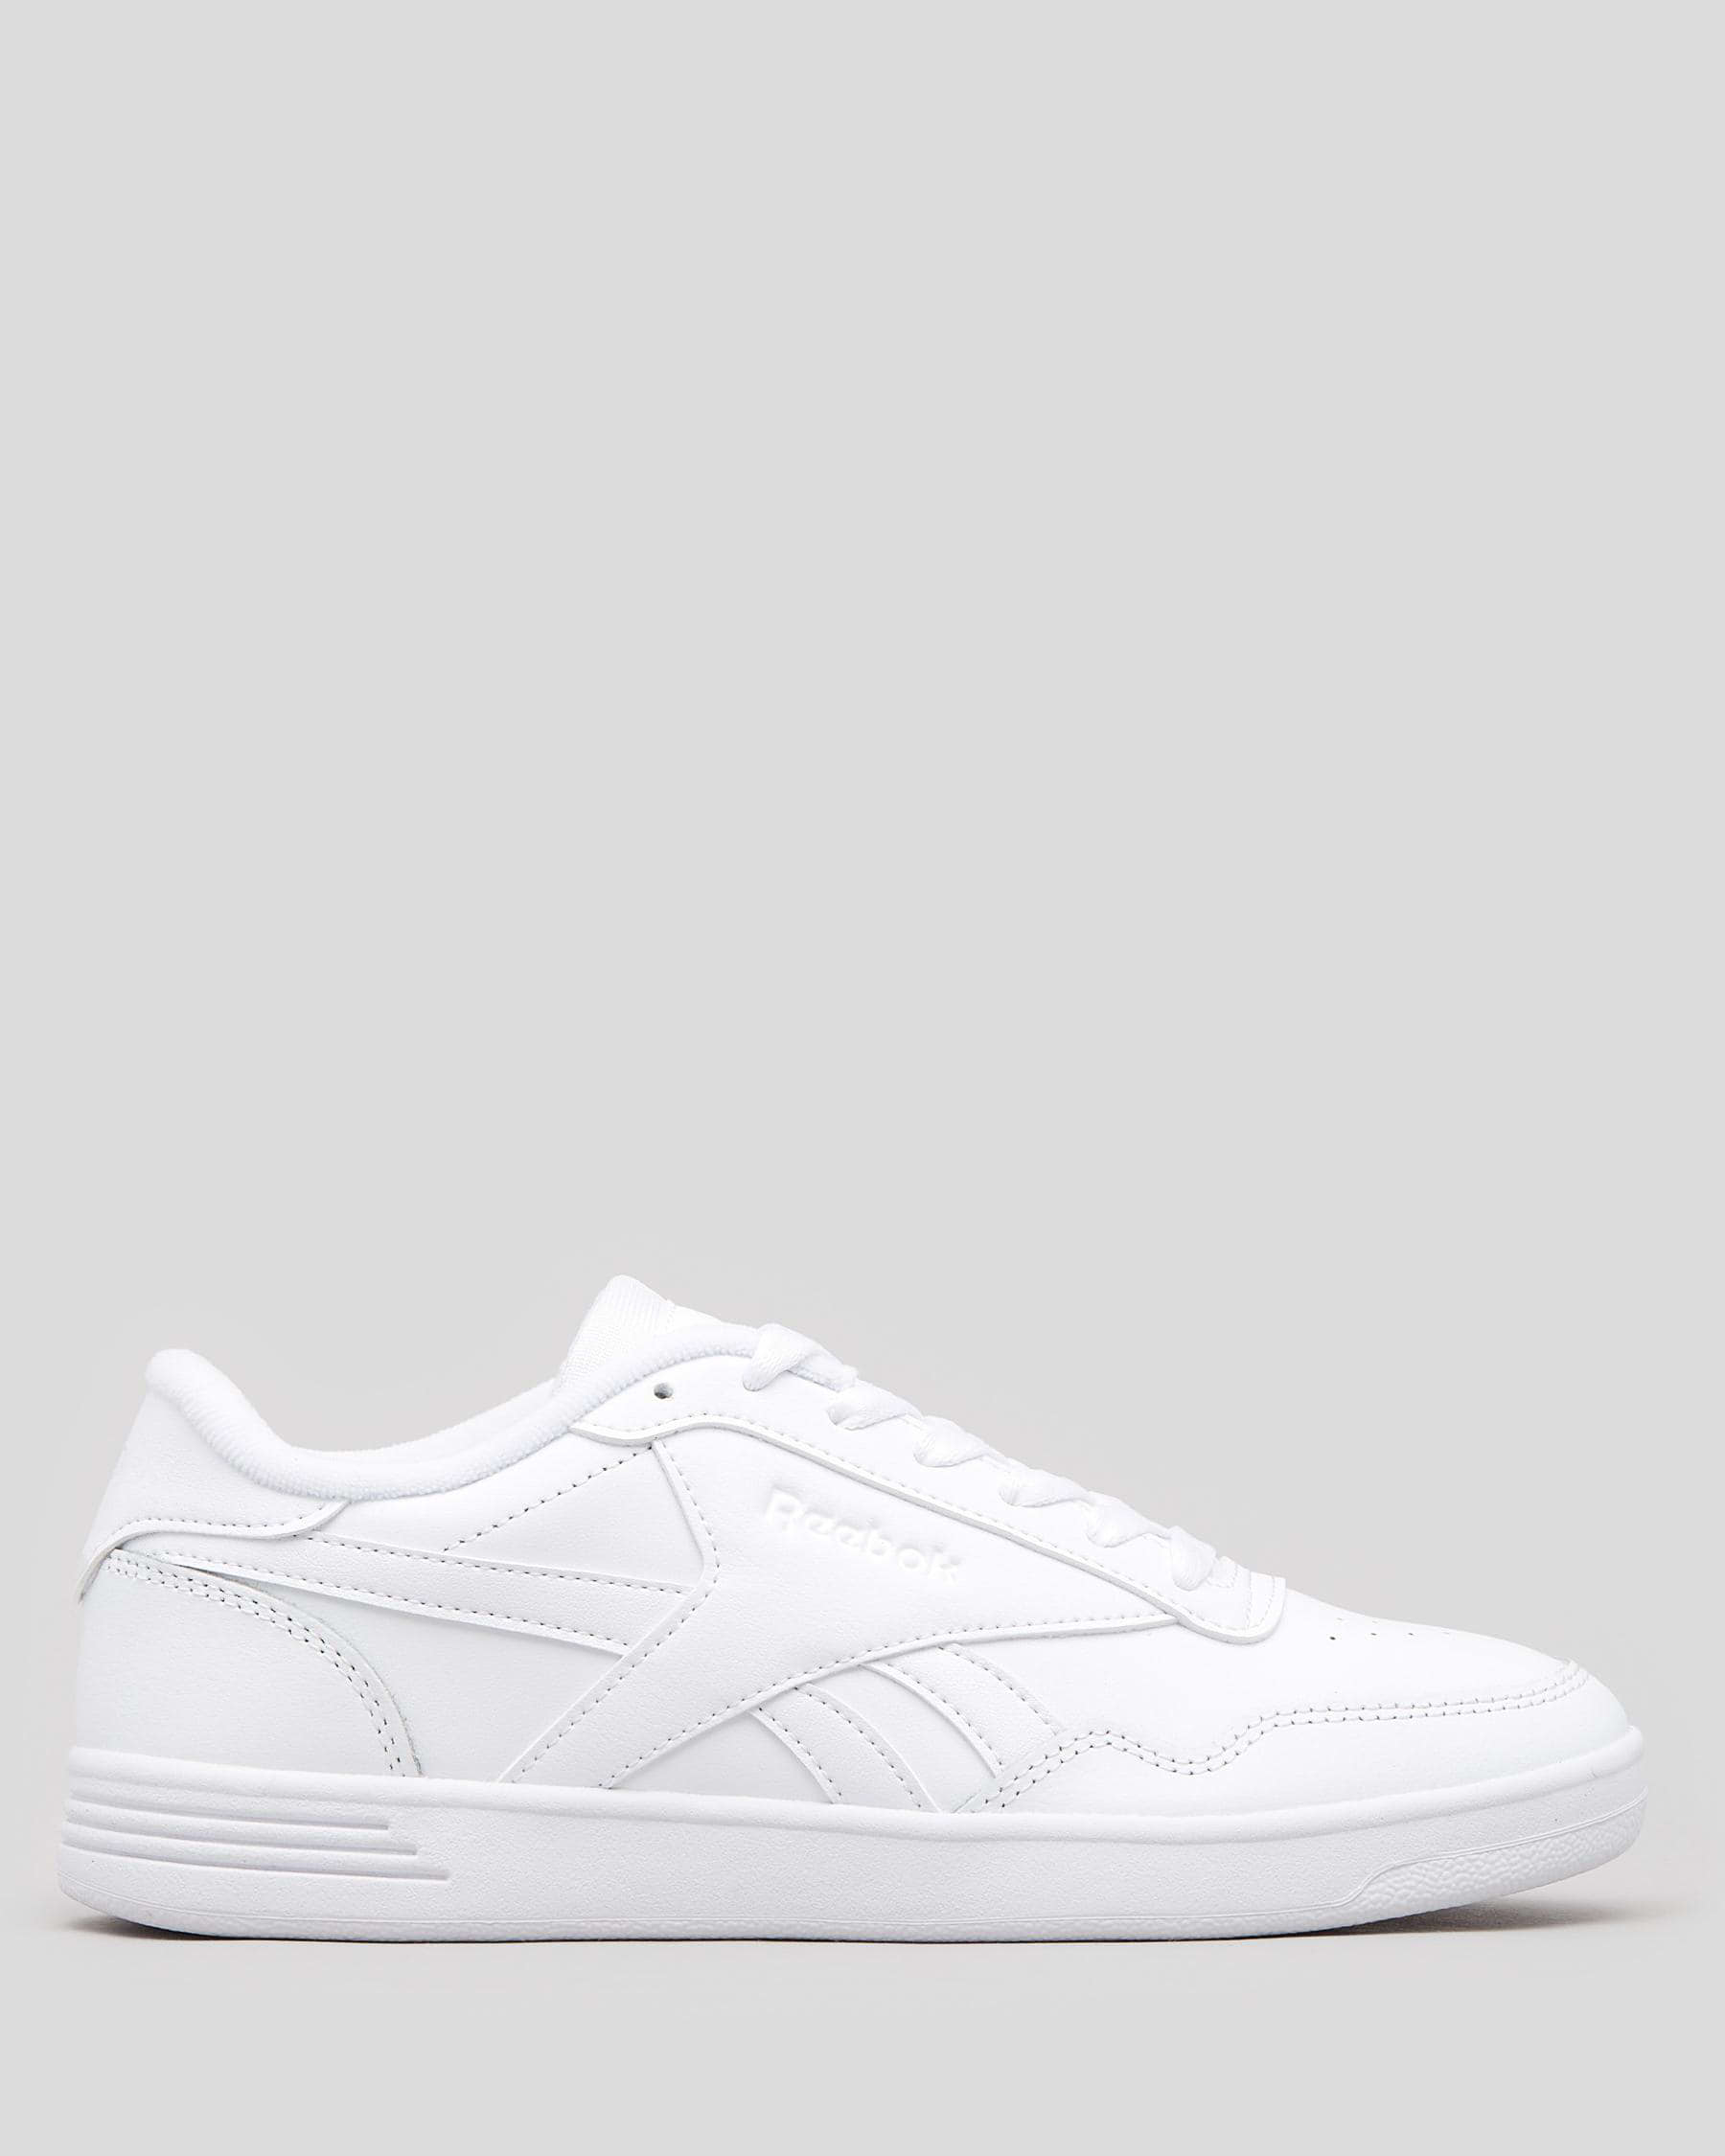 Reebok Womens Royal Technique T Shoes In White/white - Fast Shipping ...